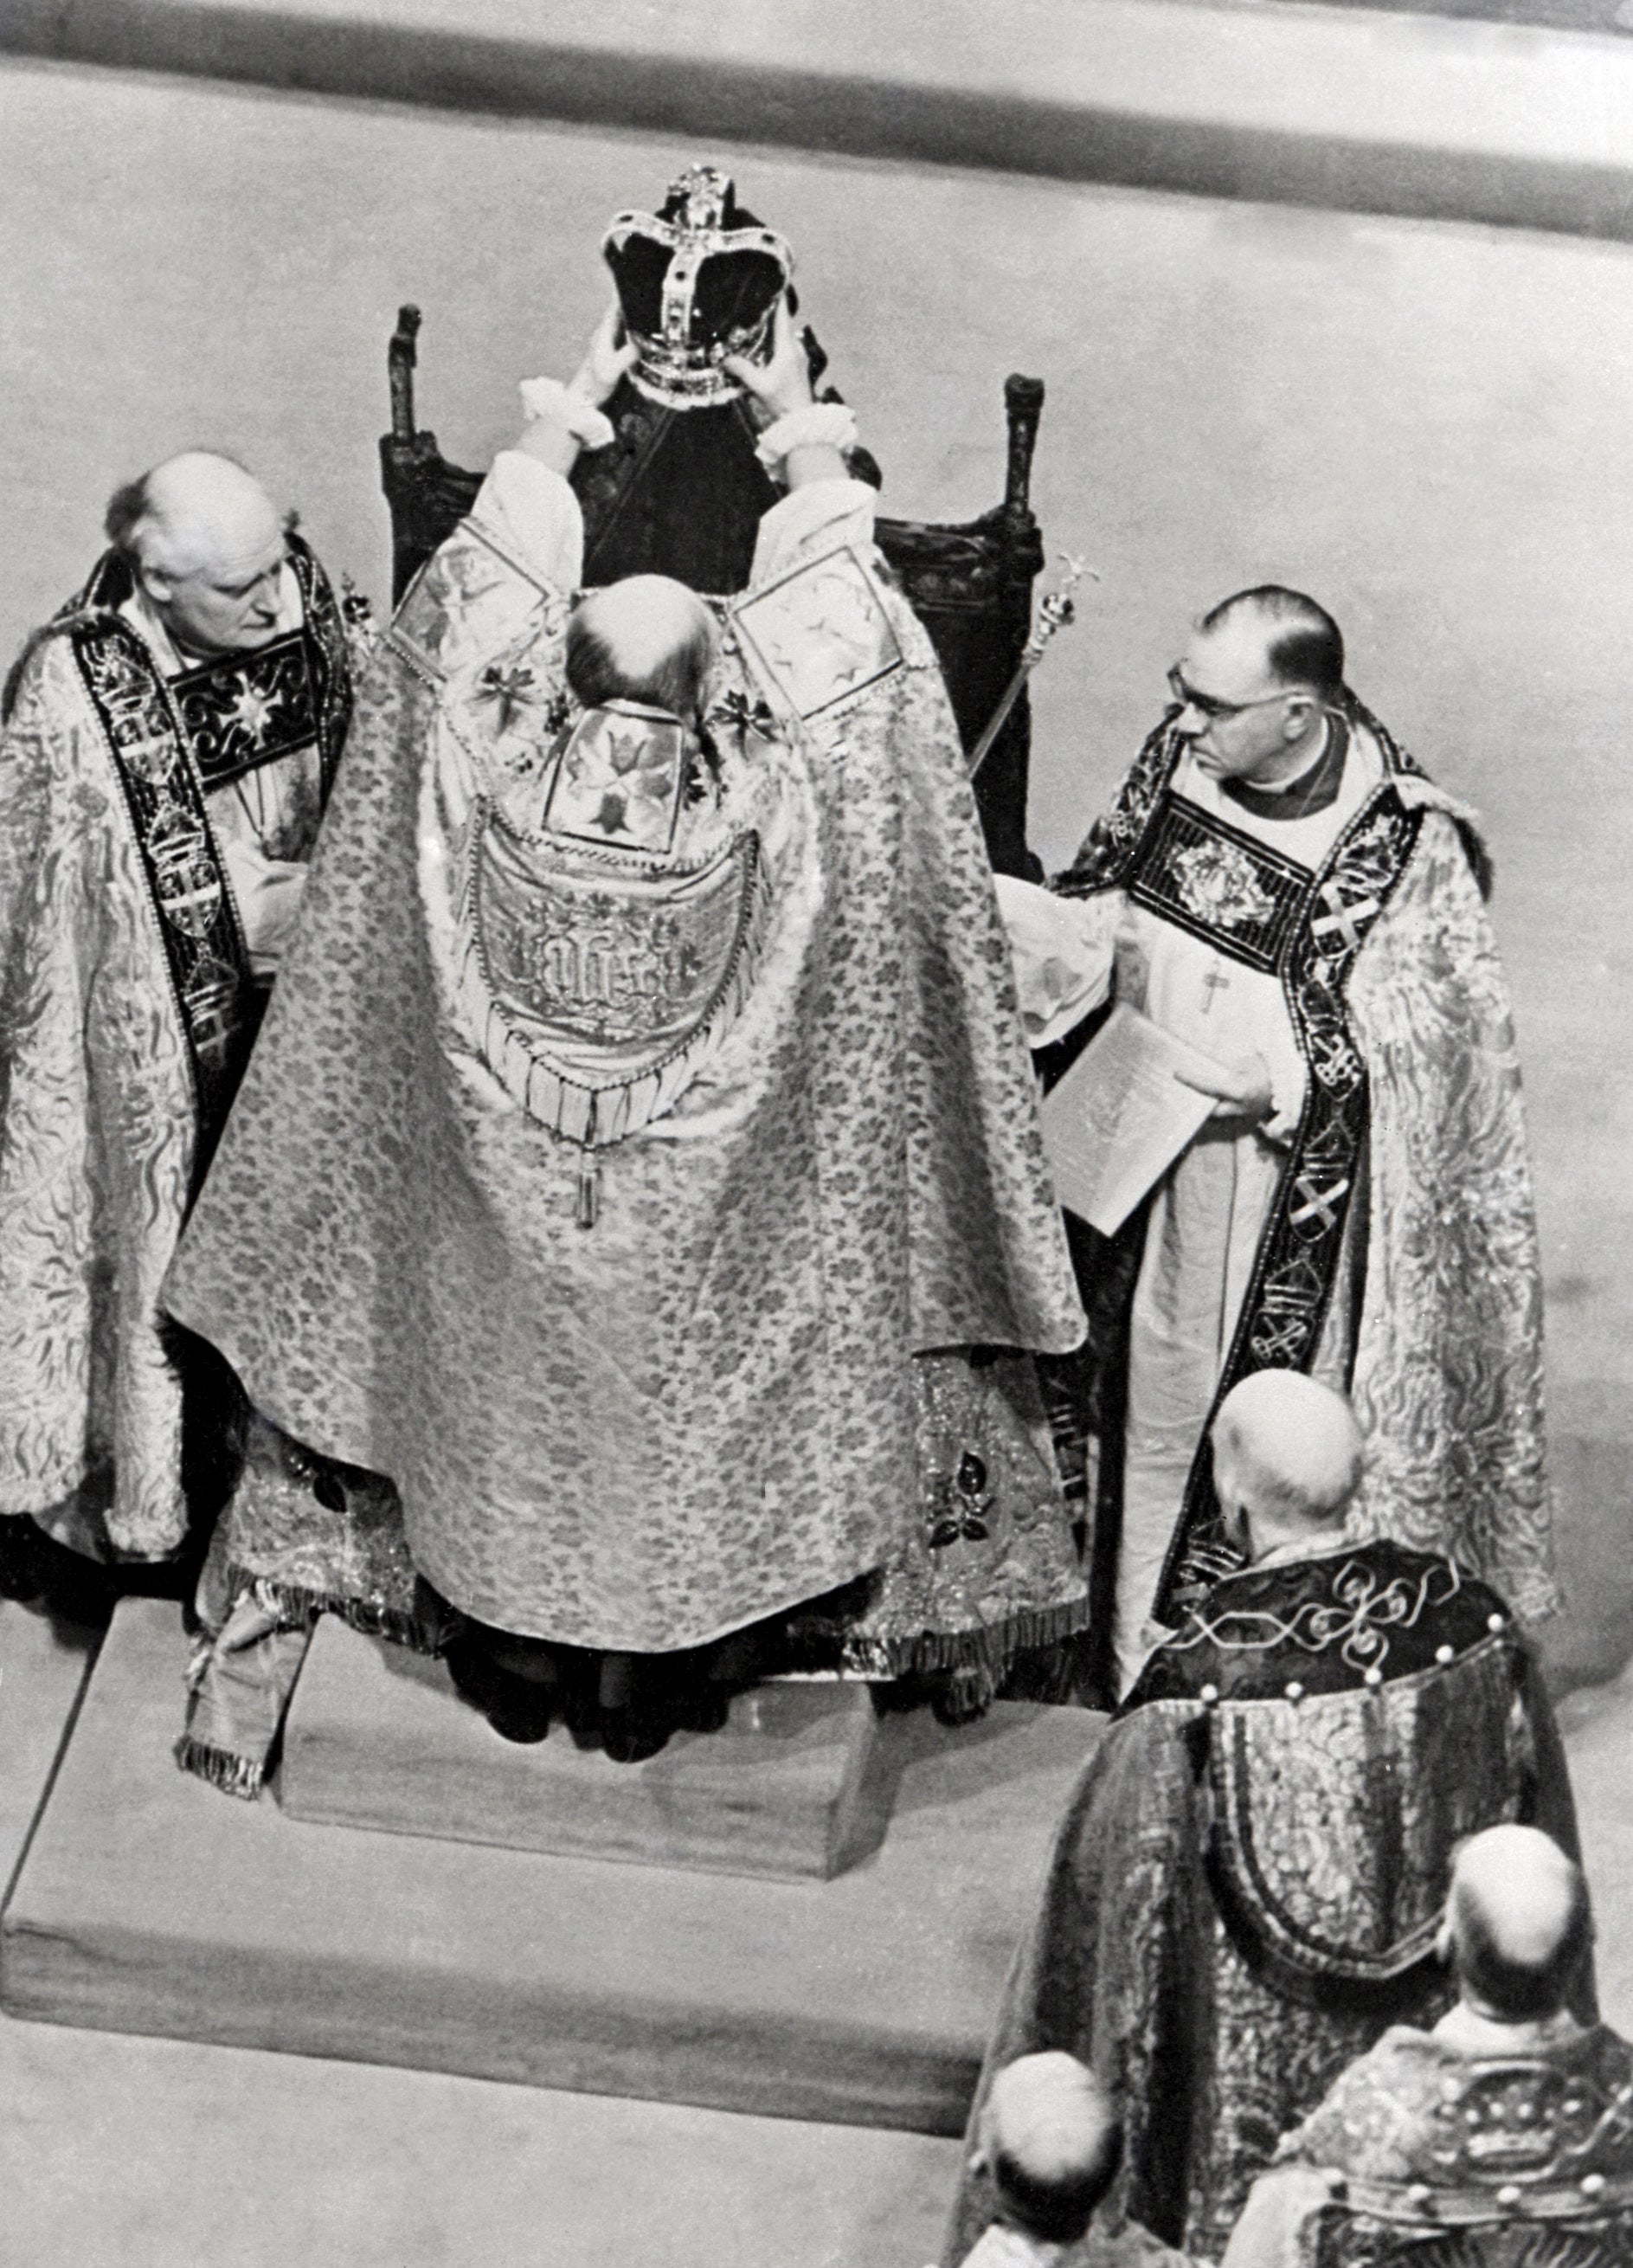 A picture of the coronation of Queen Elizabeth II, sitting on the Coronation Chair, known as St Edward's Chair, on June 2, 1953